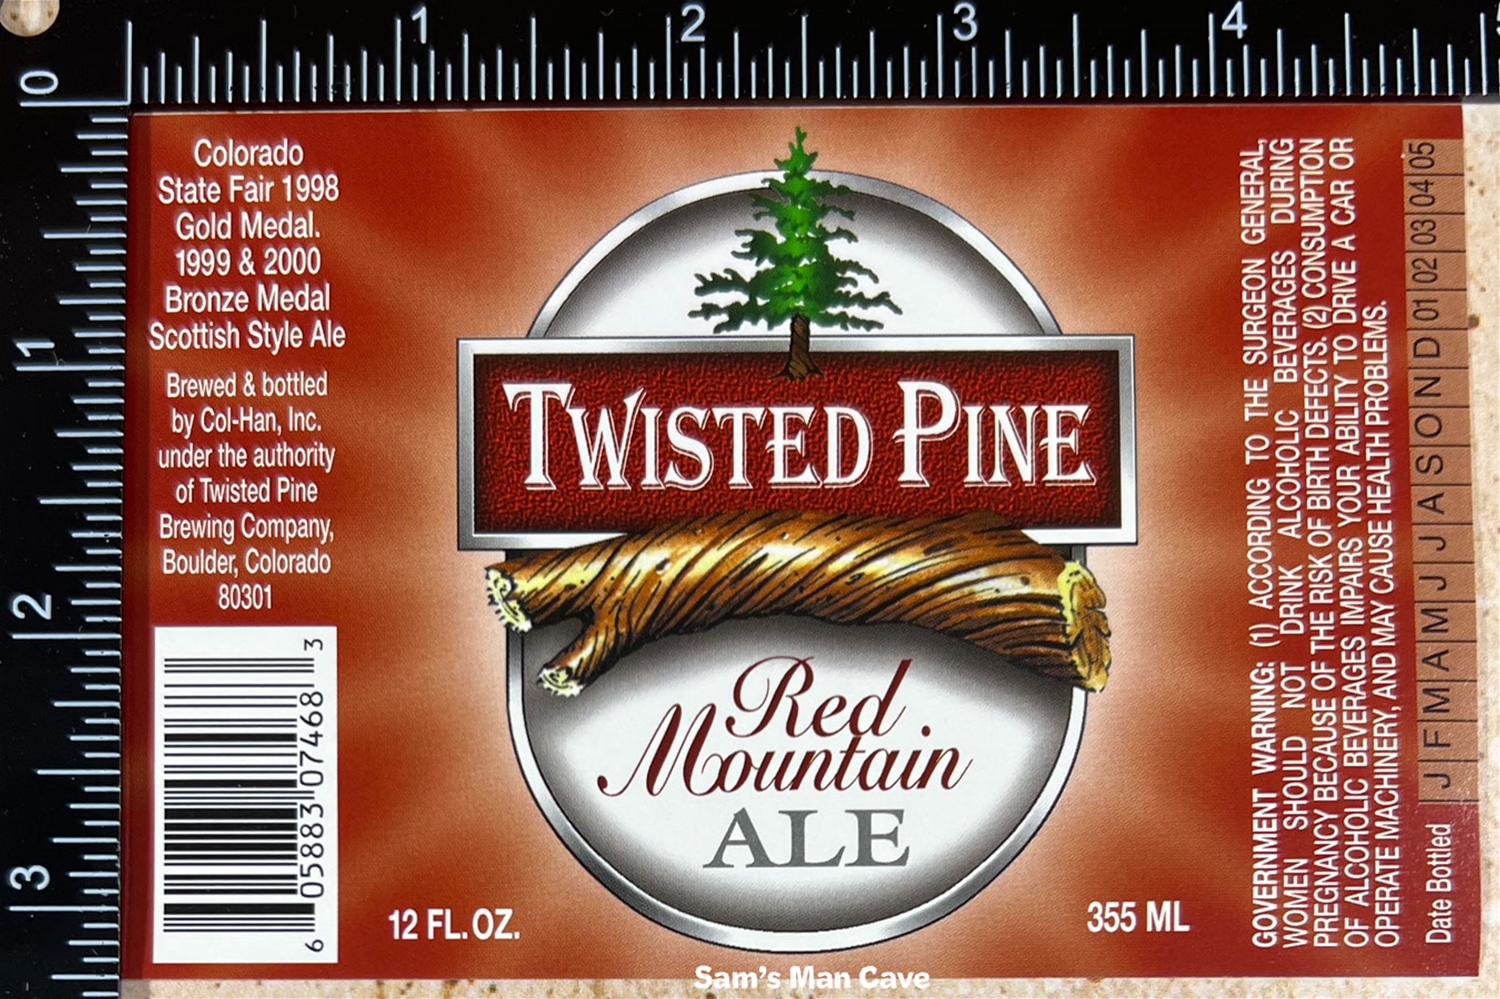 Twisted Pine Red Mountain Ale Label